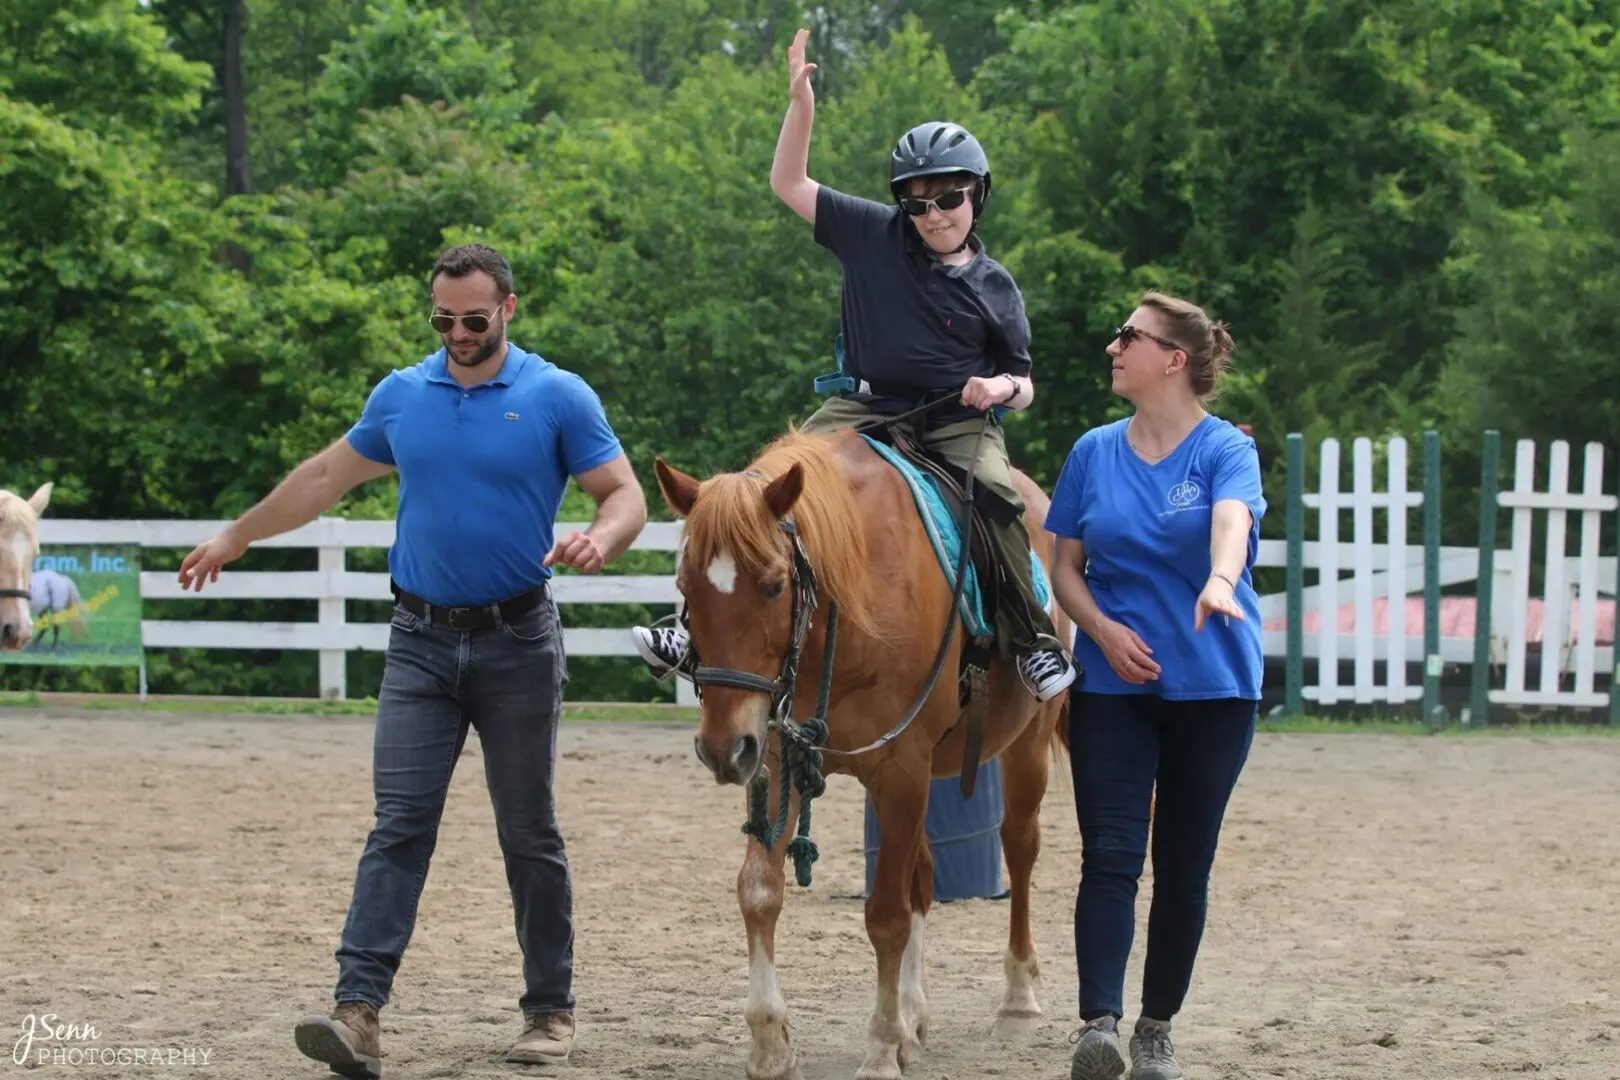 A boy in a helmet riding a horse and two adults